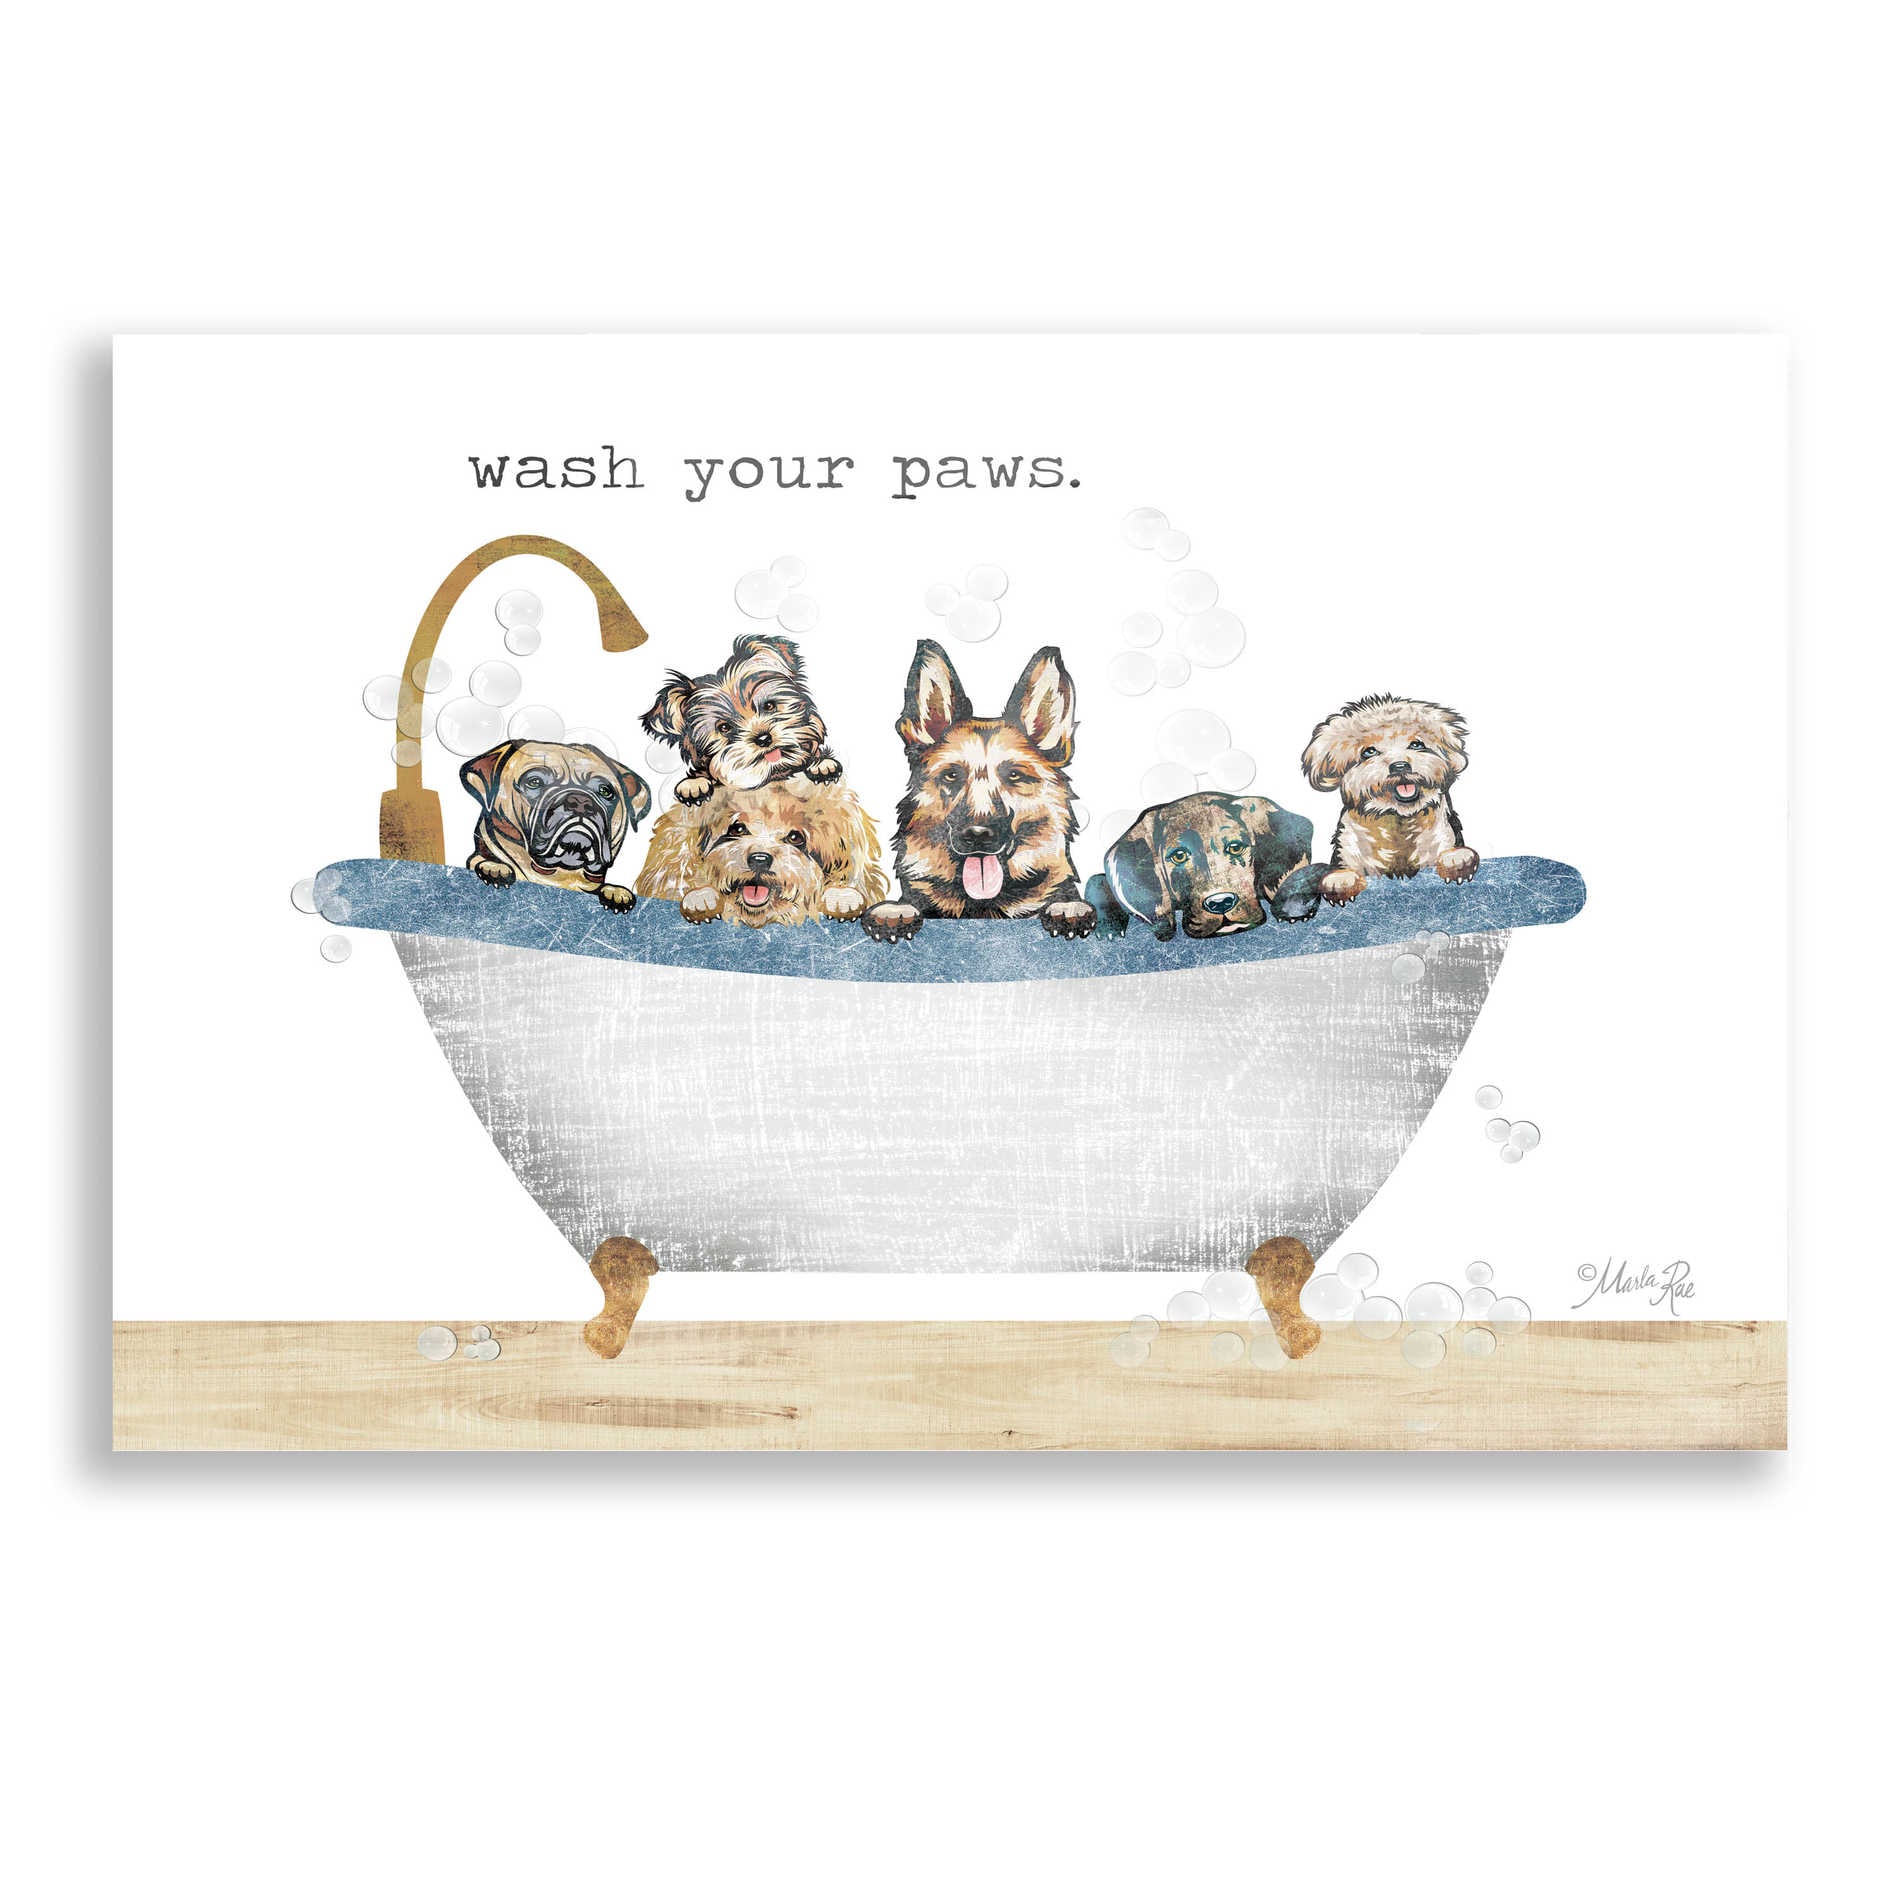 Epic Art 'Wash Your Paws' by Marla Rae, Acrylic Glass Wall Art,16x12